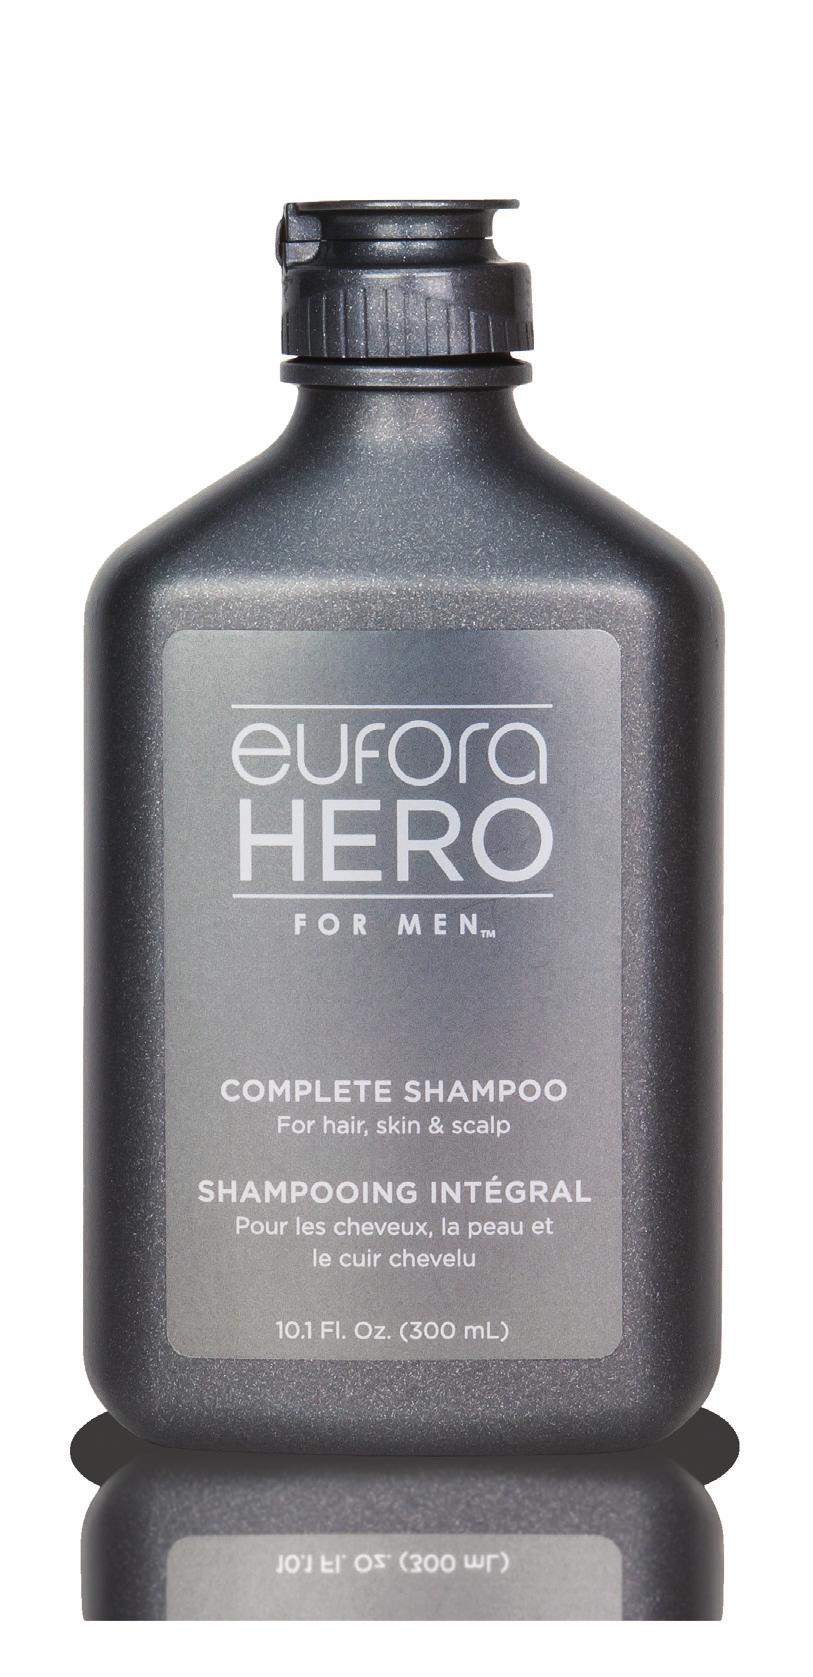 COMPLETE SHAMPOO A concentrated and moisturizing premiere cleansing shampoo that delivers thick, creamy lather.